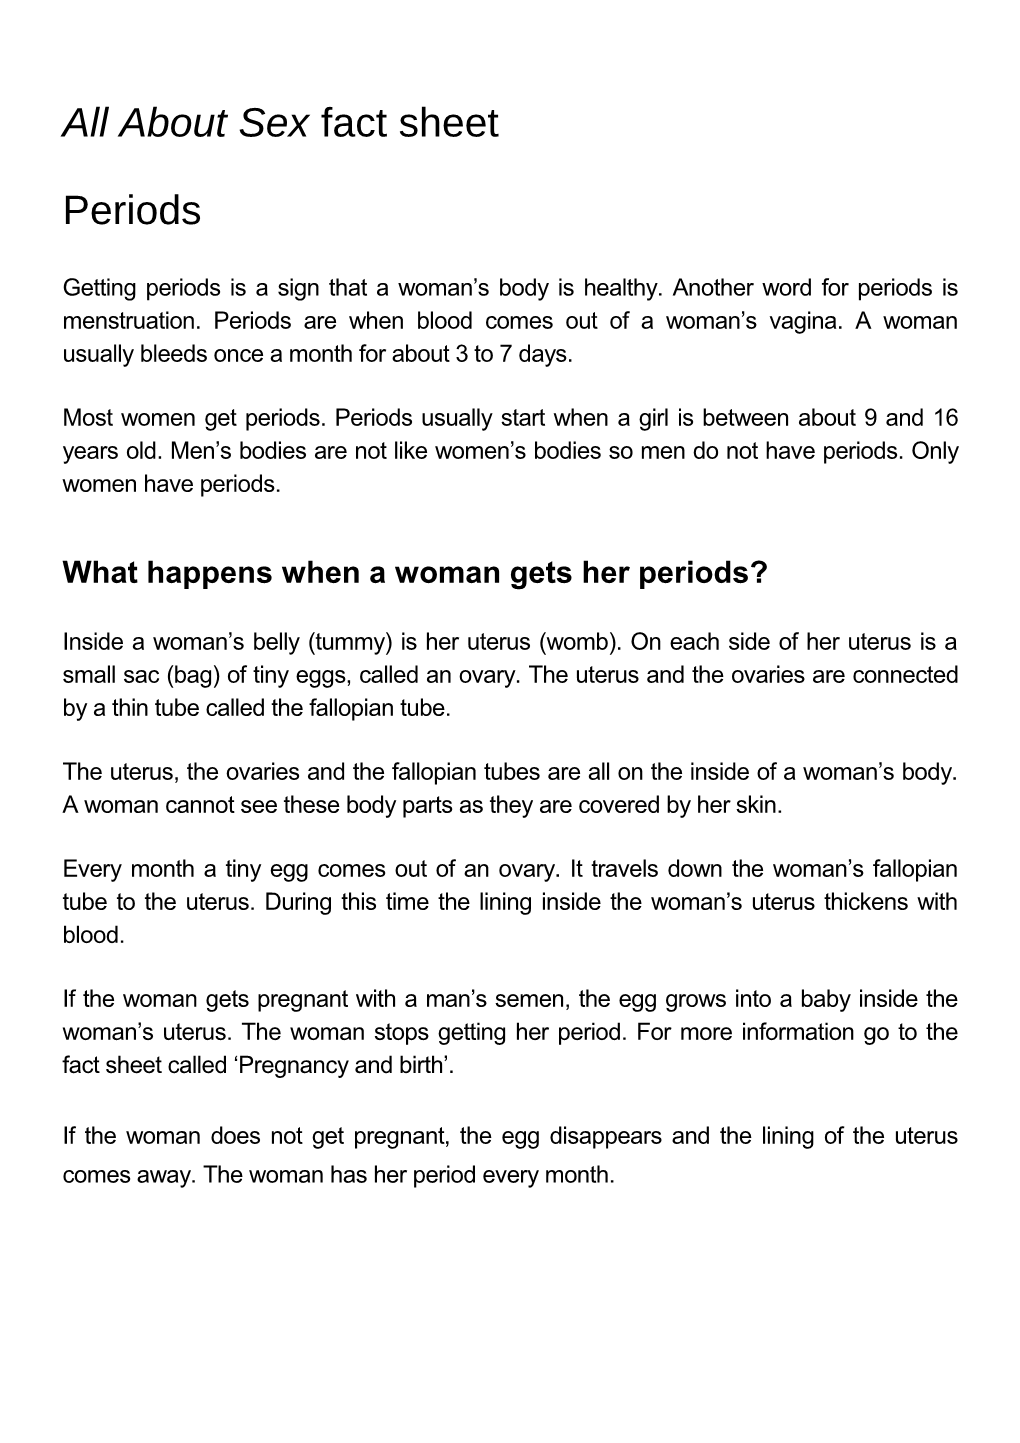 What Happens When a Woman Gets Her Periods?